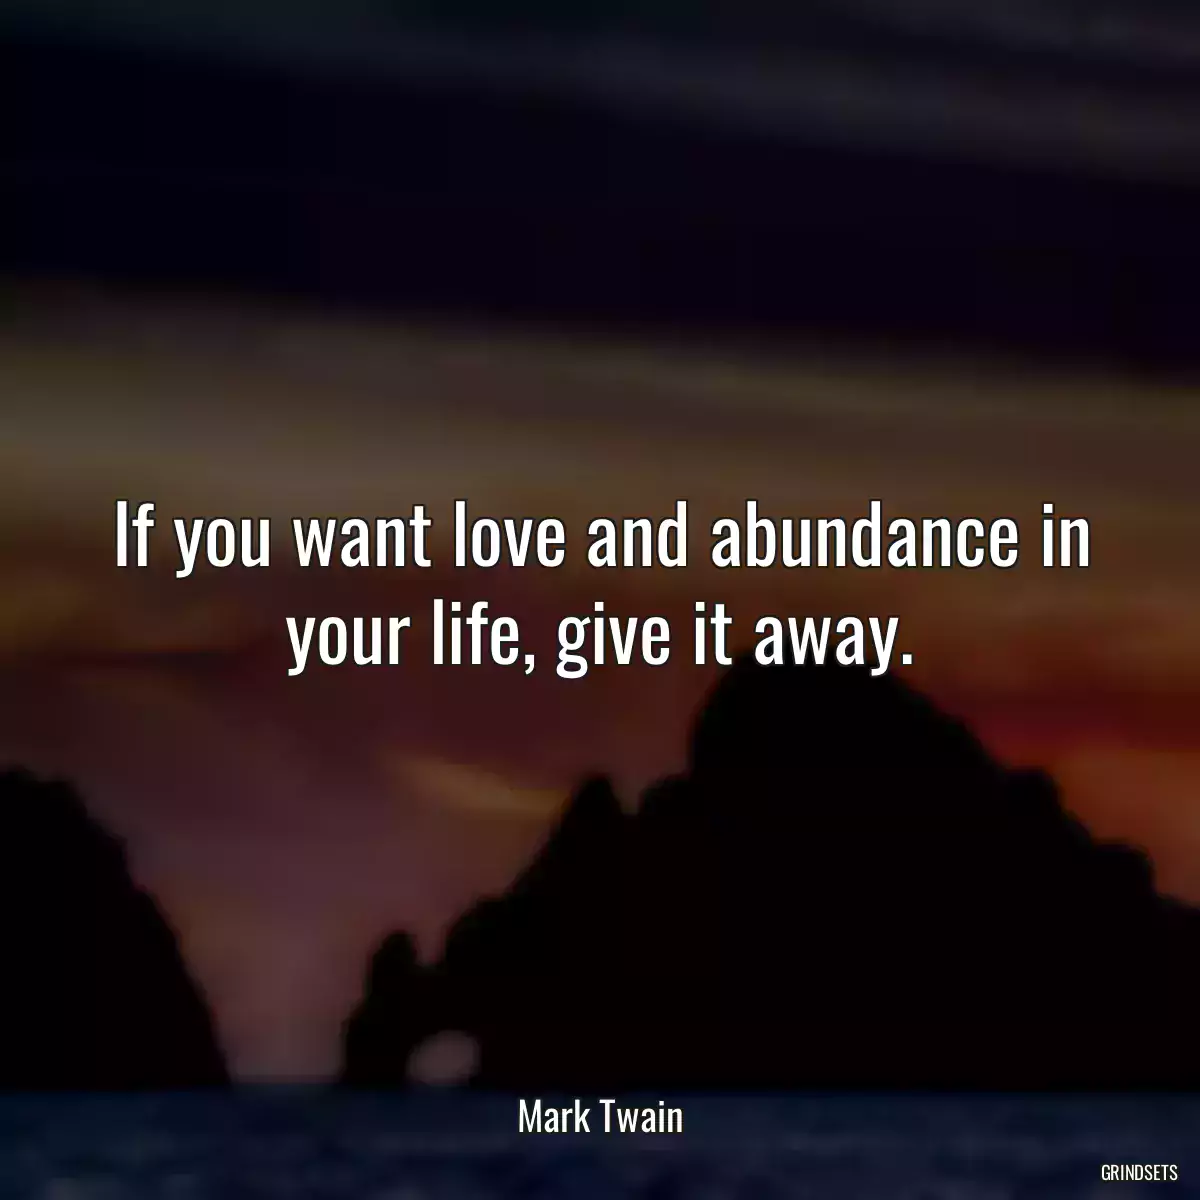 If you want love and abundance in your life, give it away.